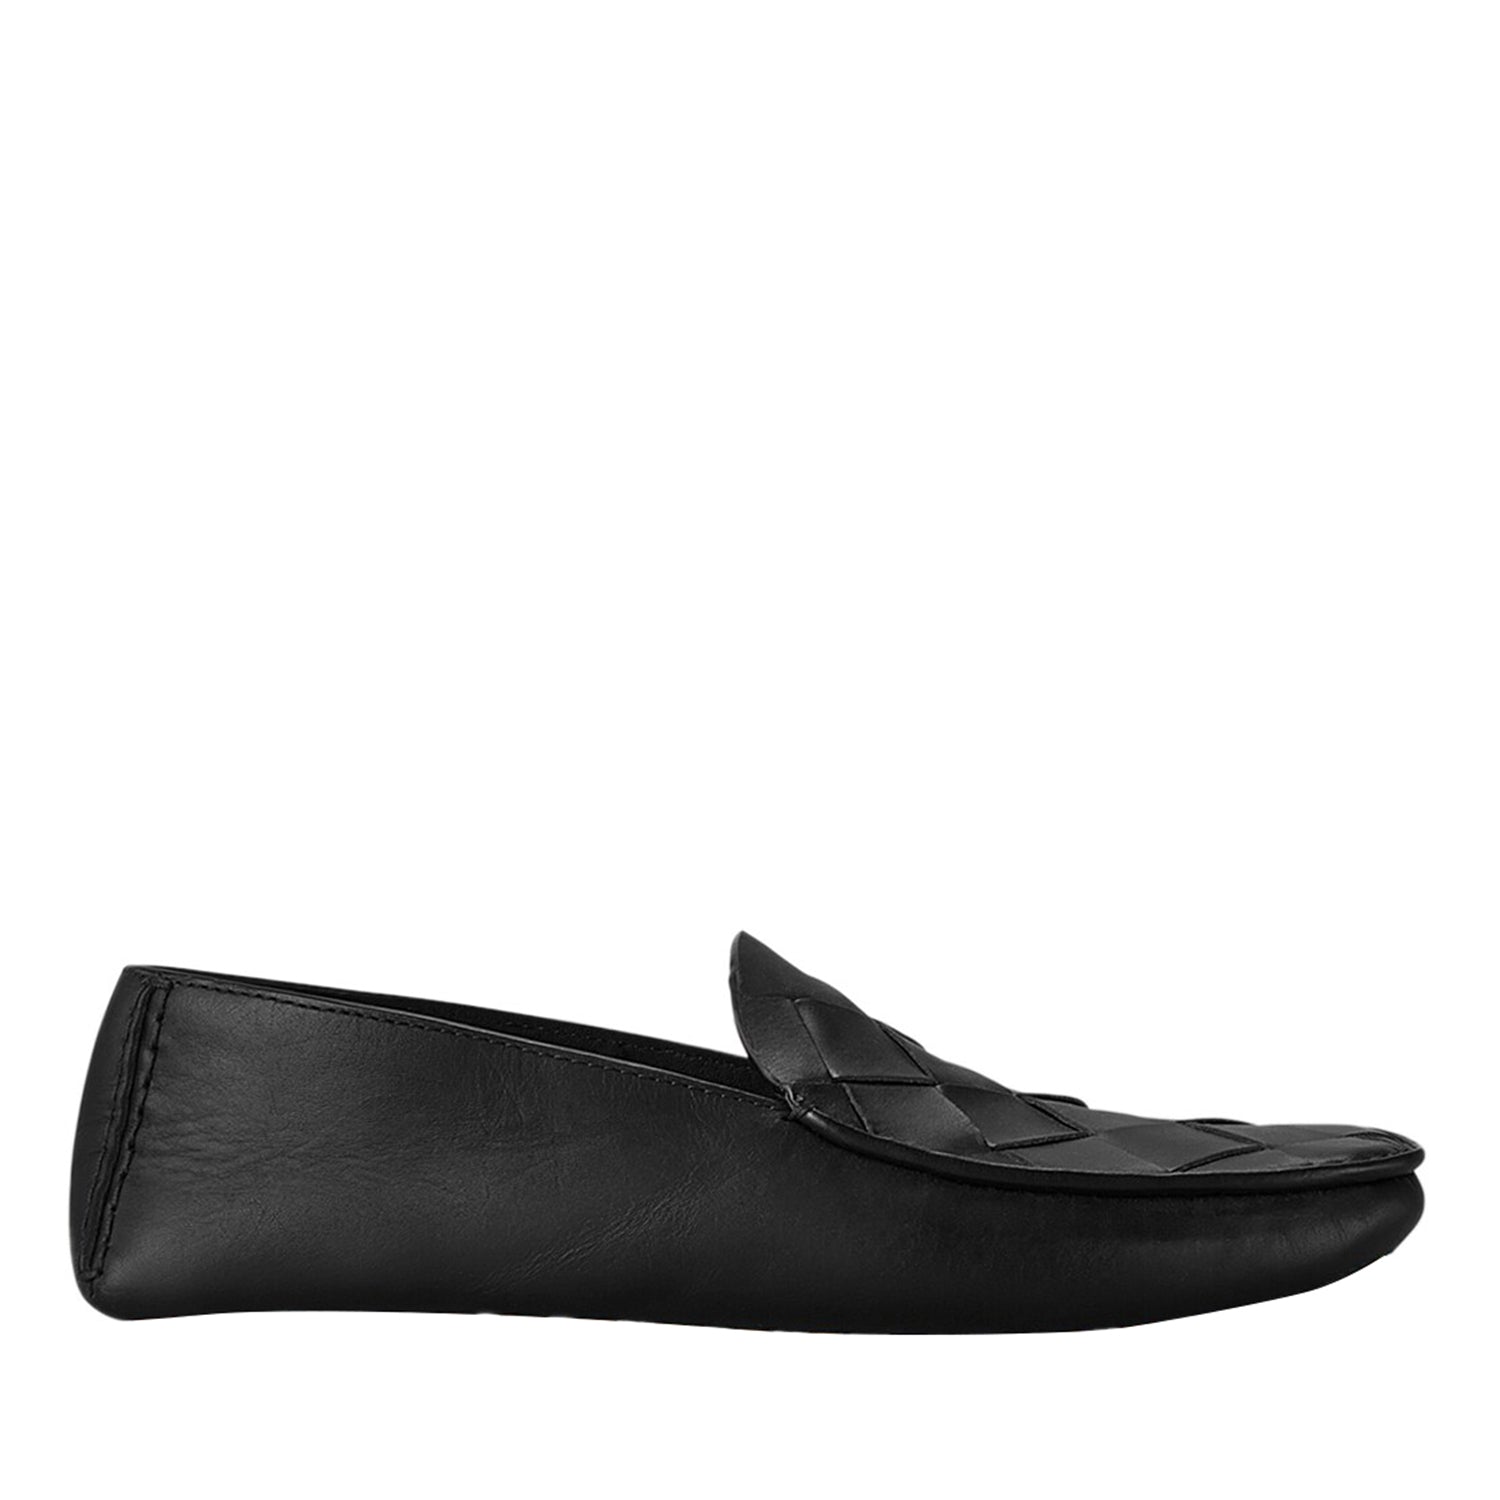 Black Woven Leather Loafers